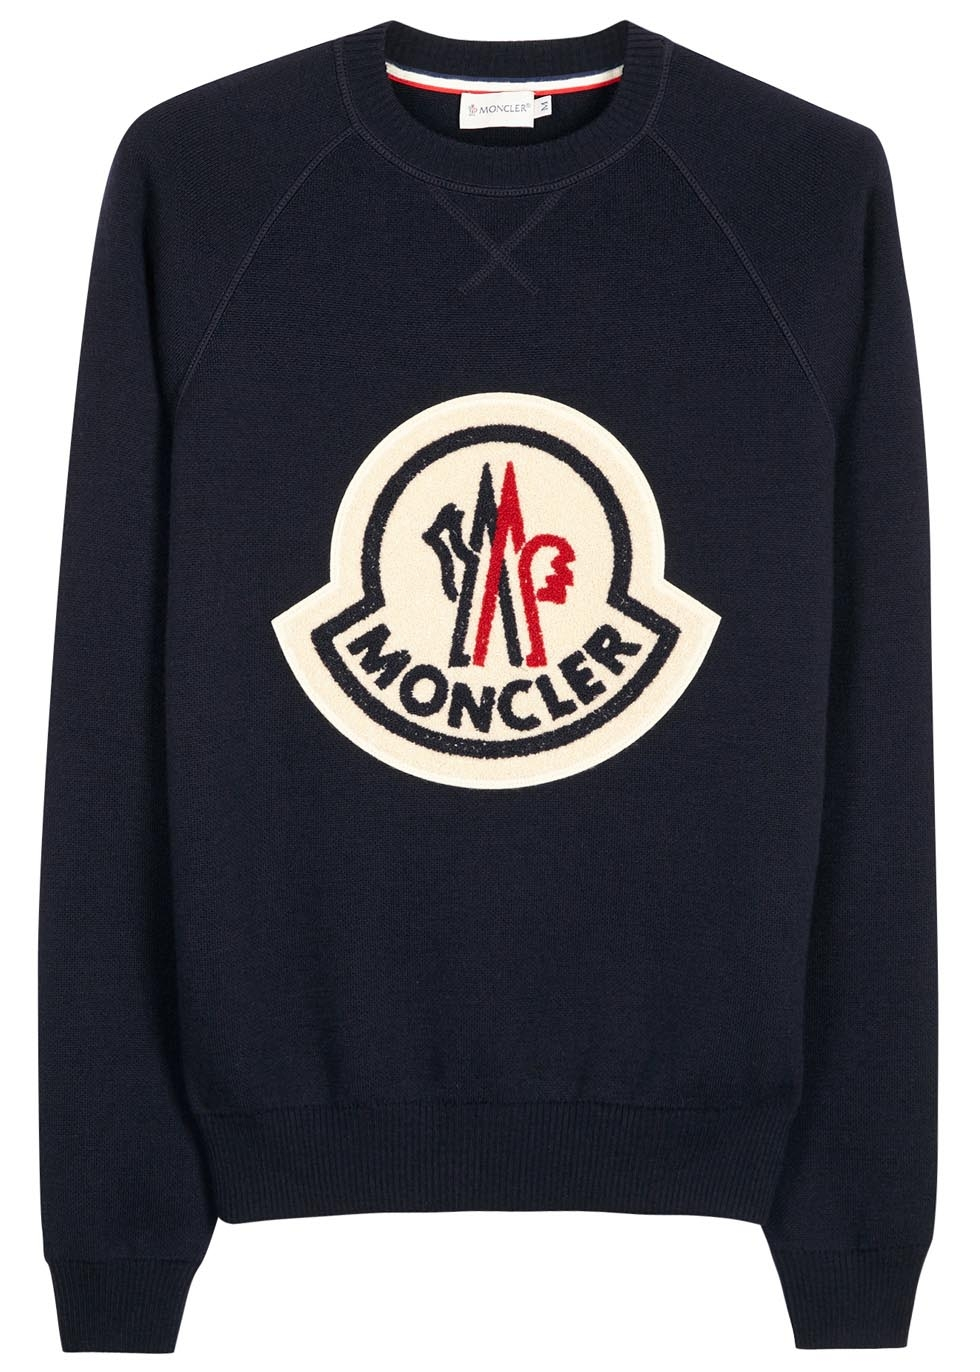 moncler blue jumper | West of Rayleigh